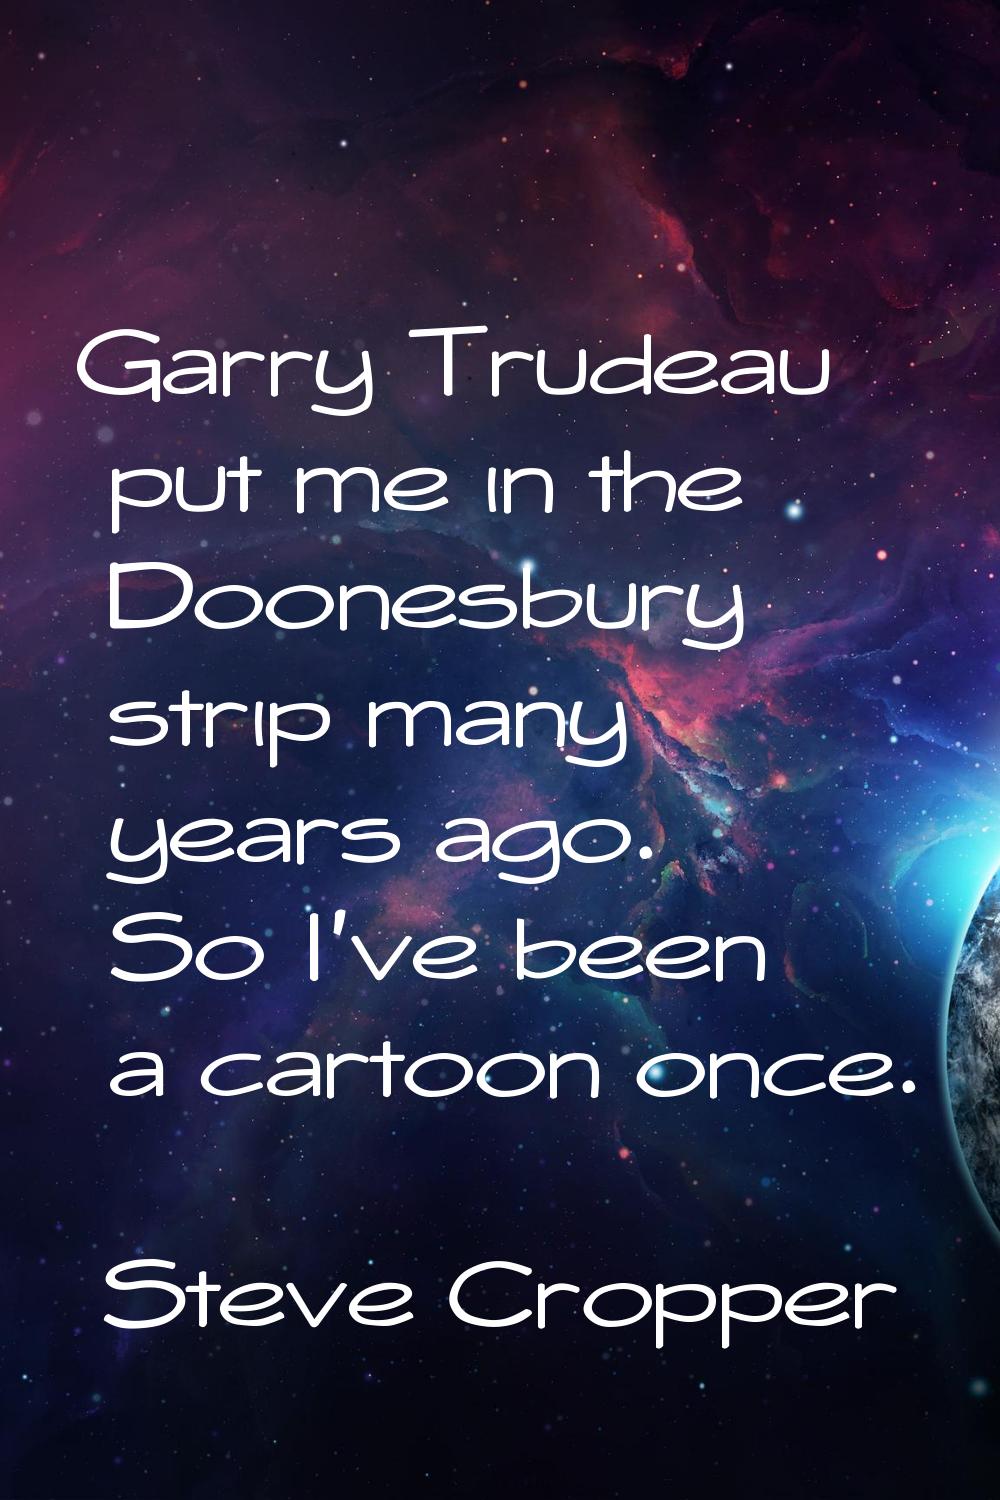 Garry Trudeau put me in the Doonesbury strip many years ago. So I've been a cartoon once.